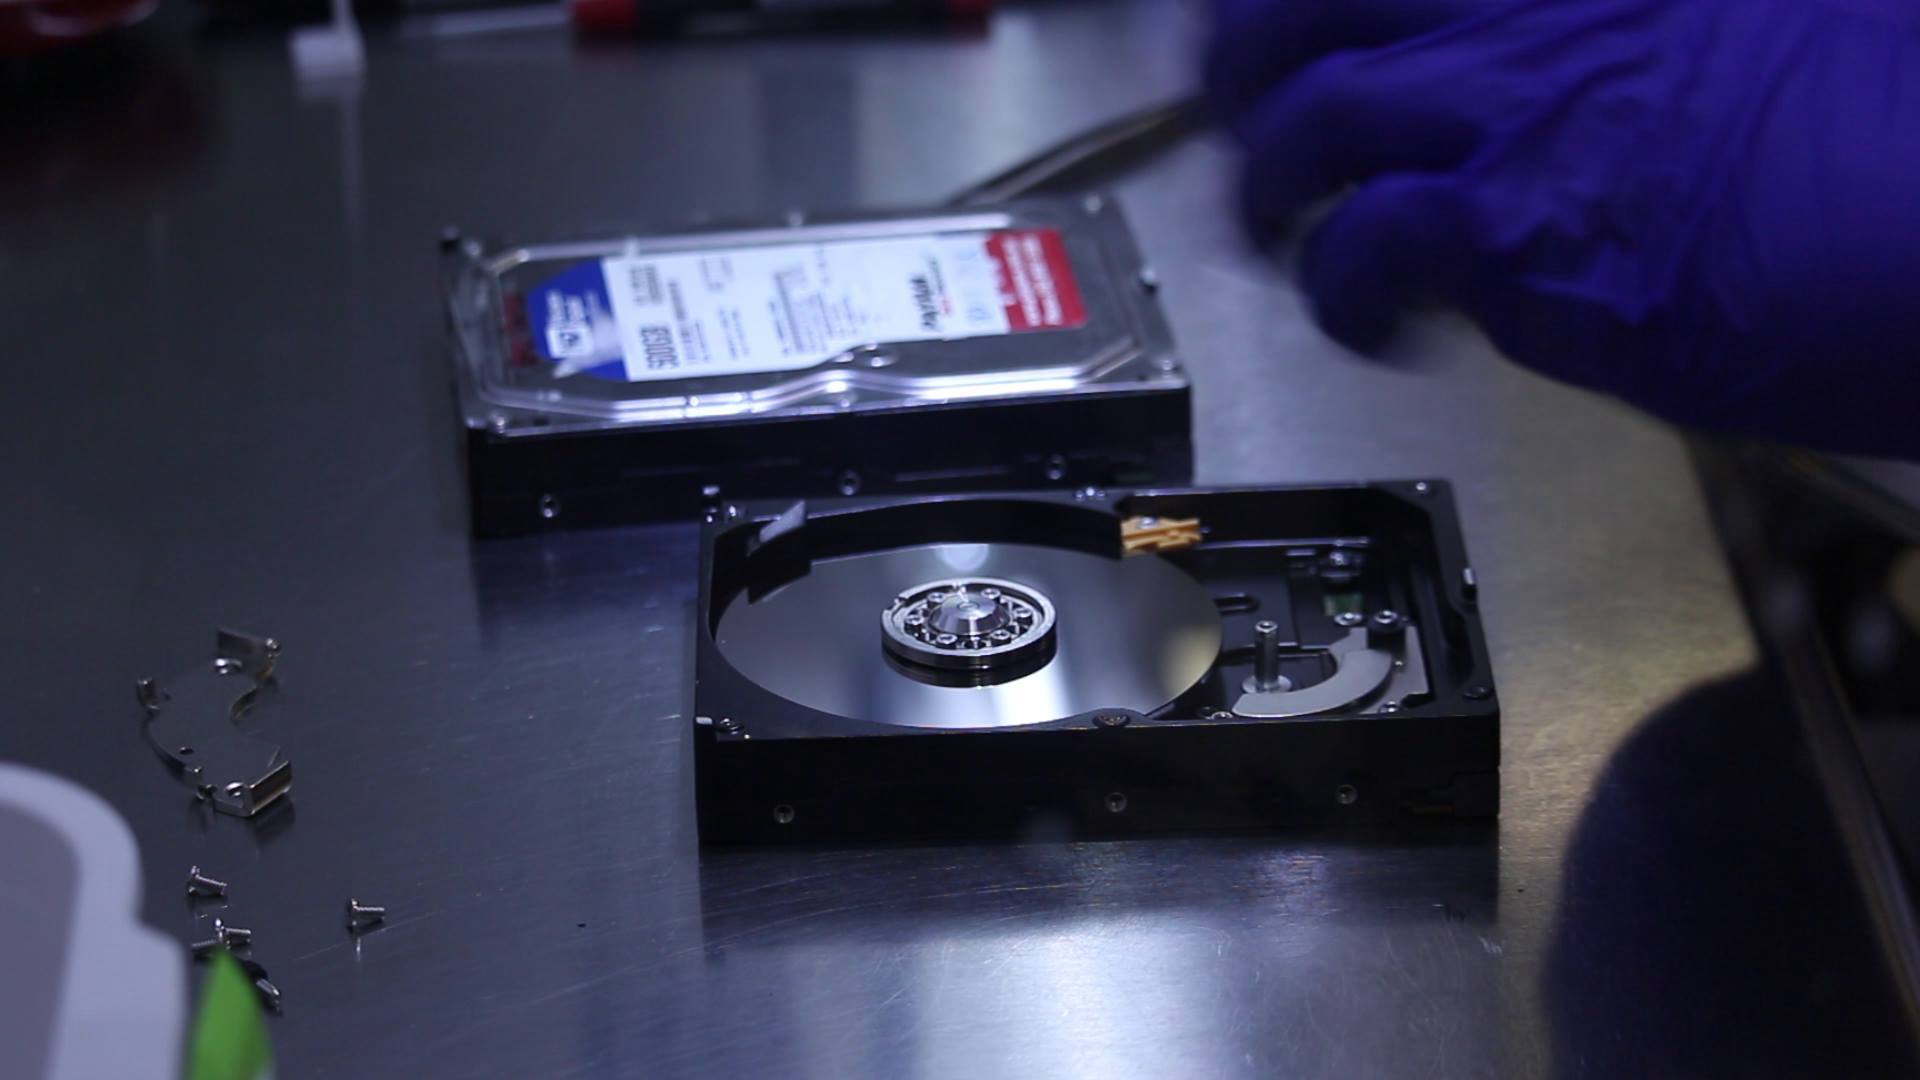 How To Data Recovery Lost Files On A Hard Drive?